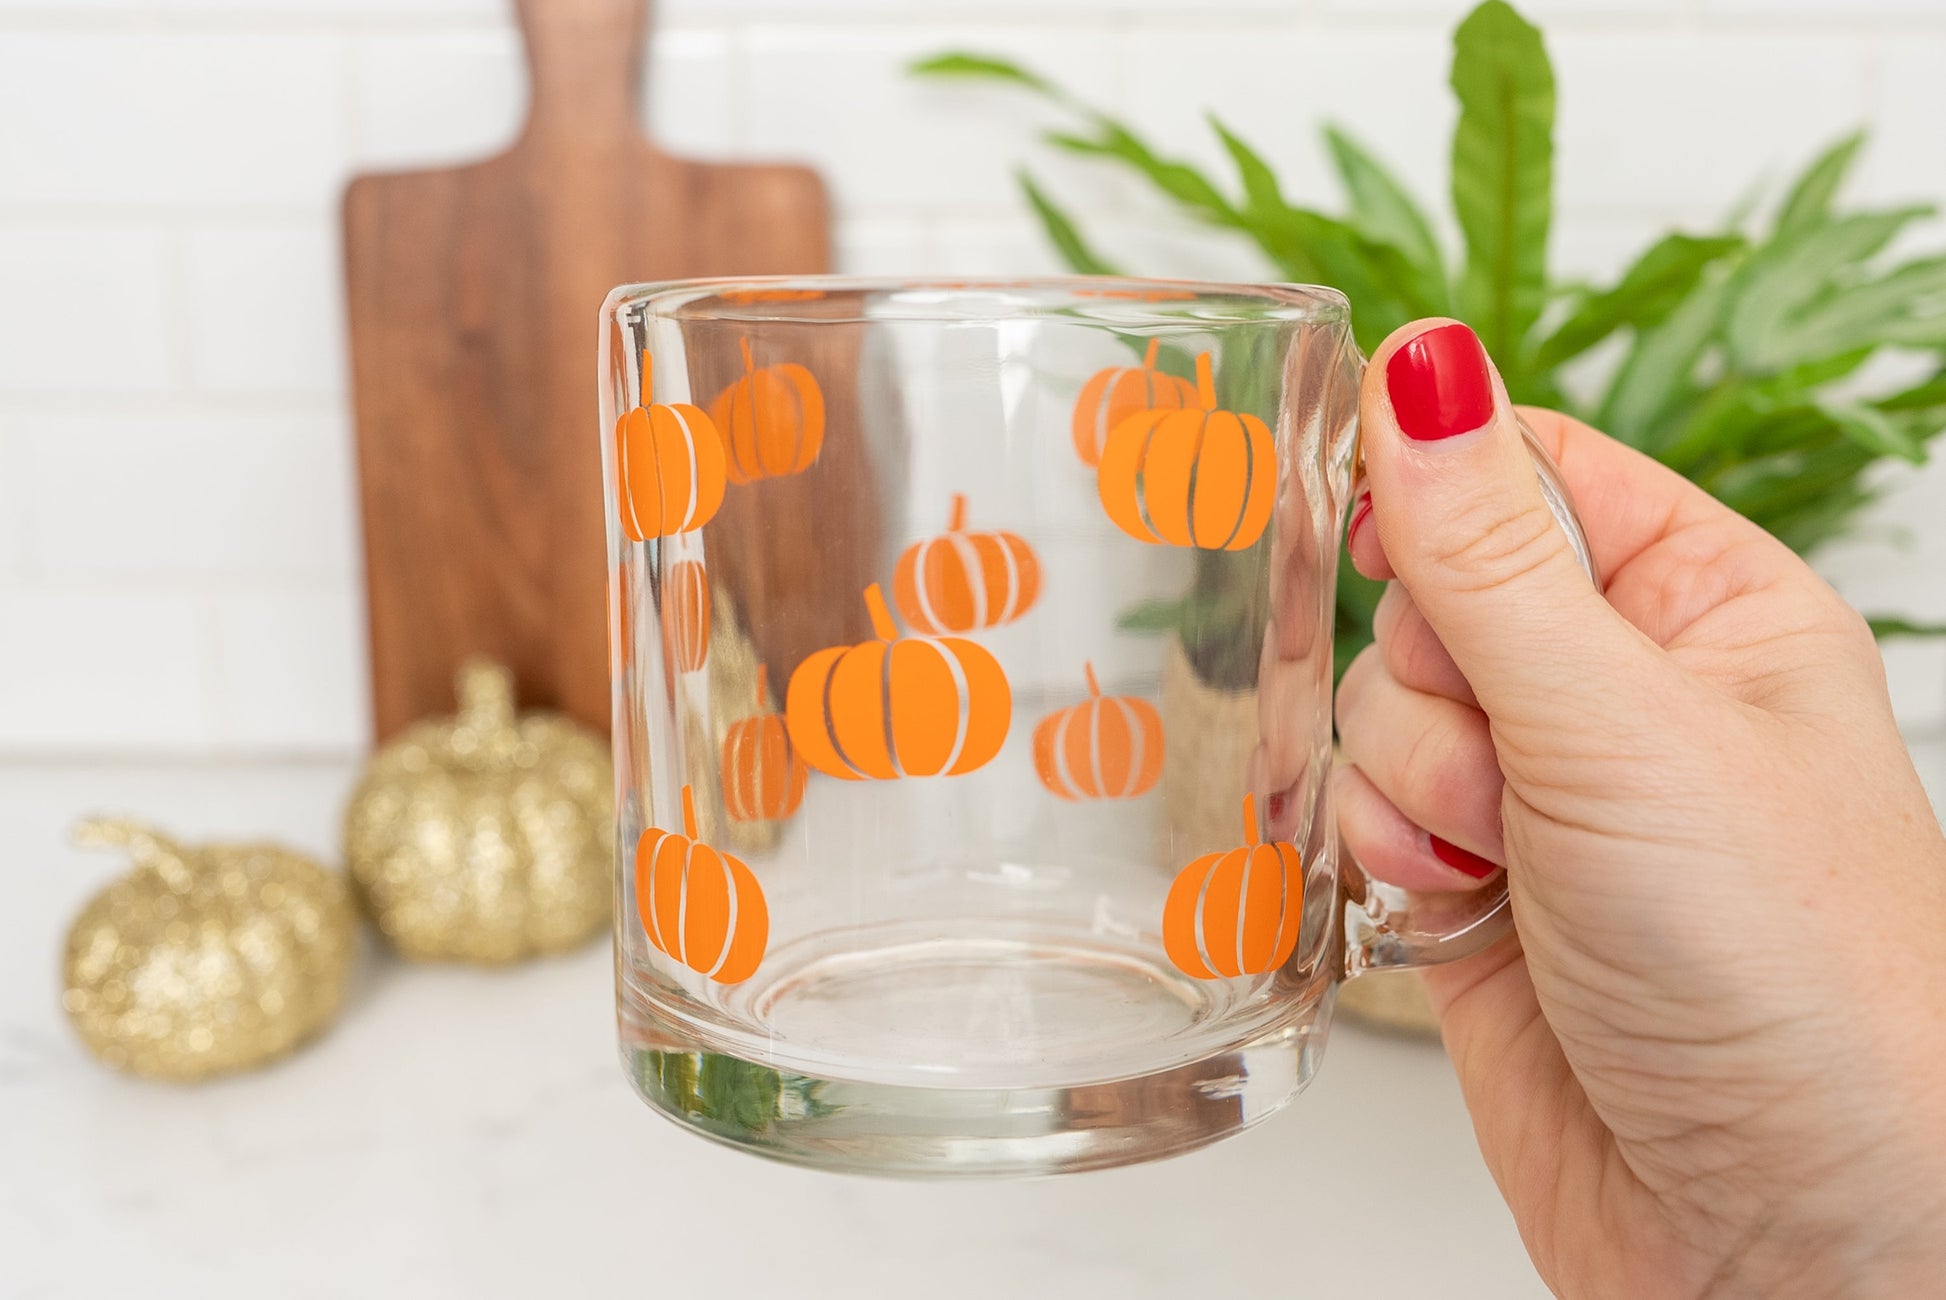 Floral Ghost Cup Halloween Glass Cup Spooky Season Cup -  in